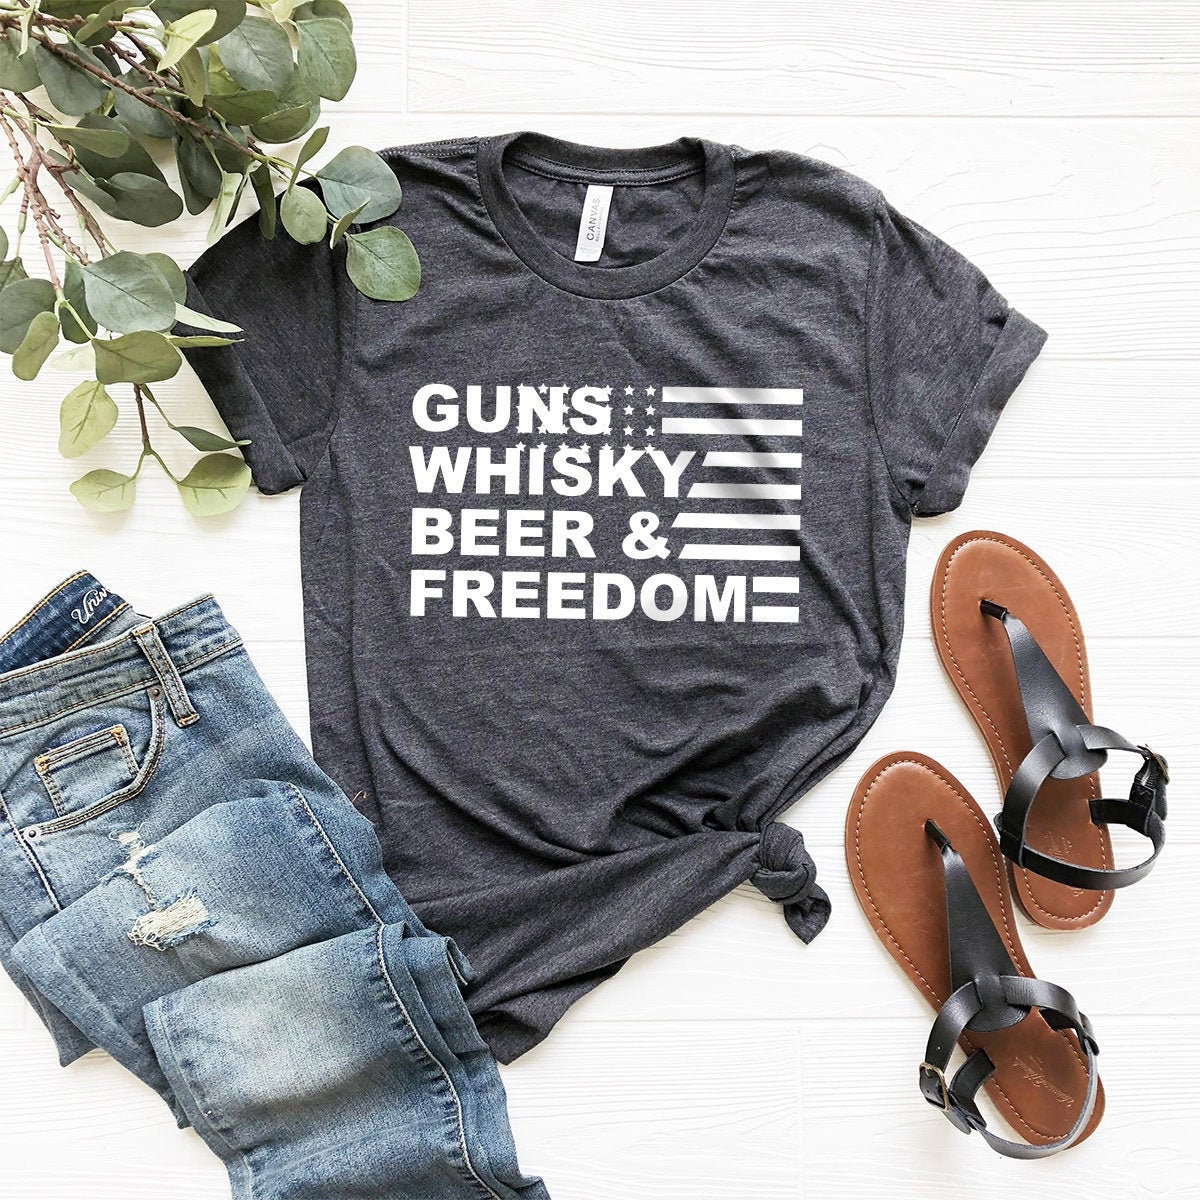 Gun Whisky Beer And Freedom With America Flag Shirt, Guns Lover Shirt, Whisky Lover Tee, Beer Lover Shirt, Freedom Shirt, American Flag Tee - Fastdeliverytees.com